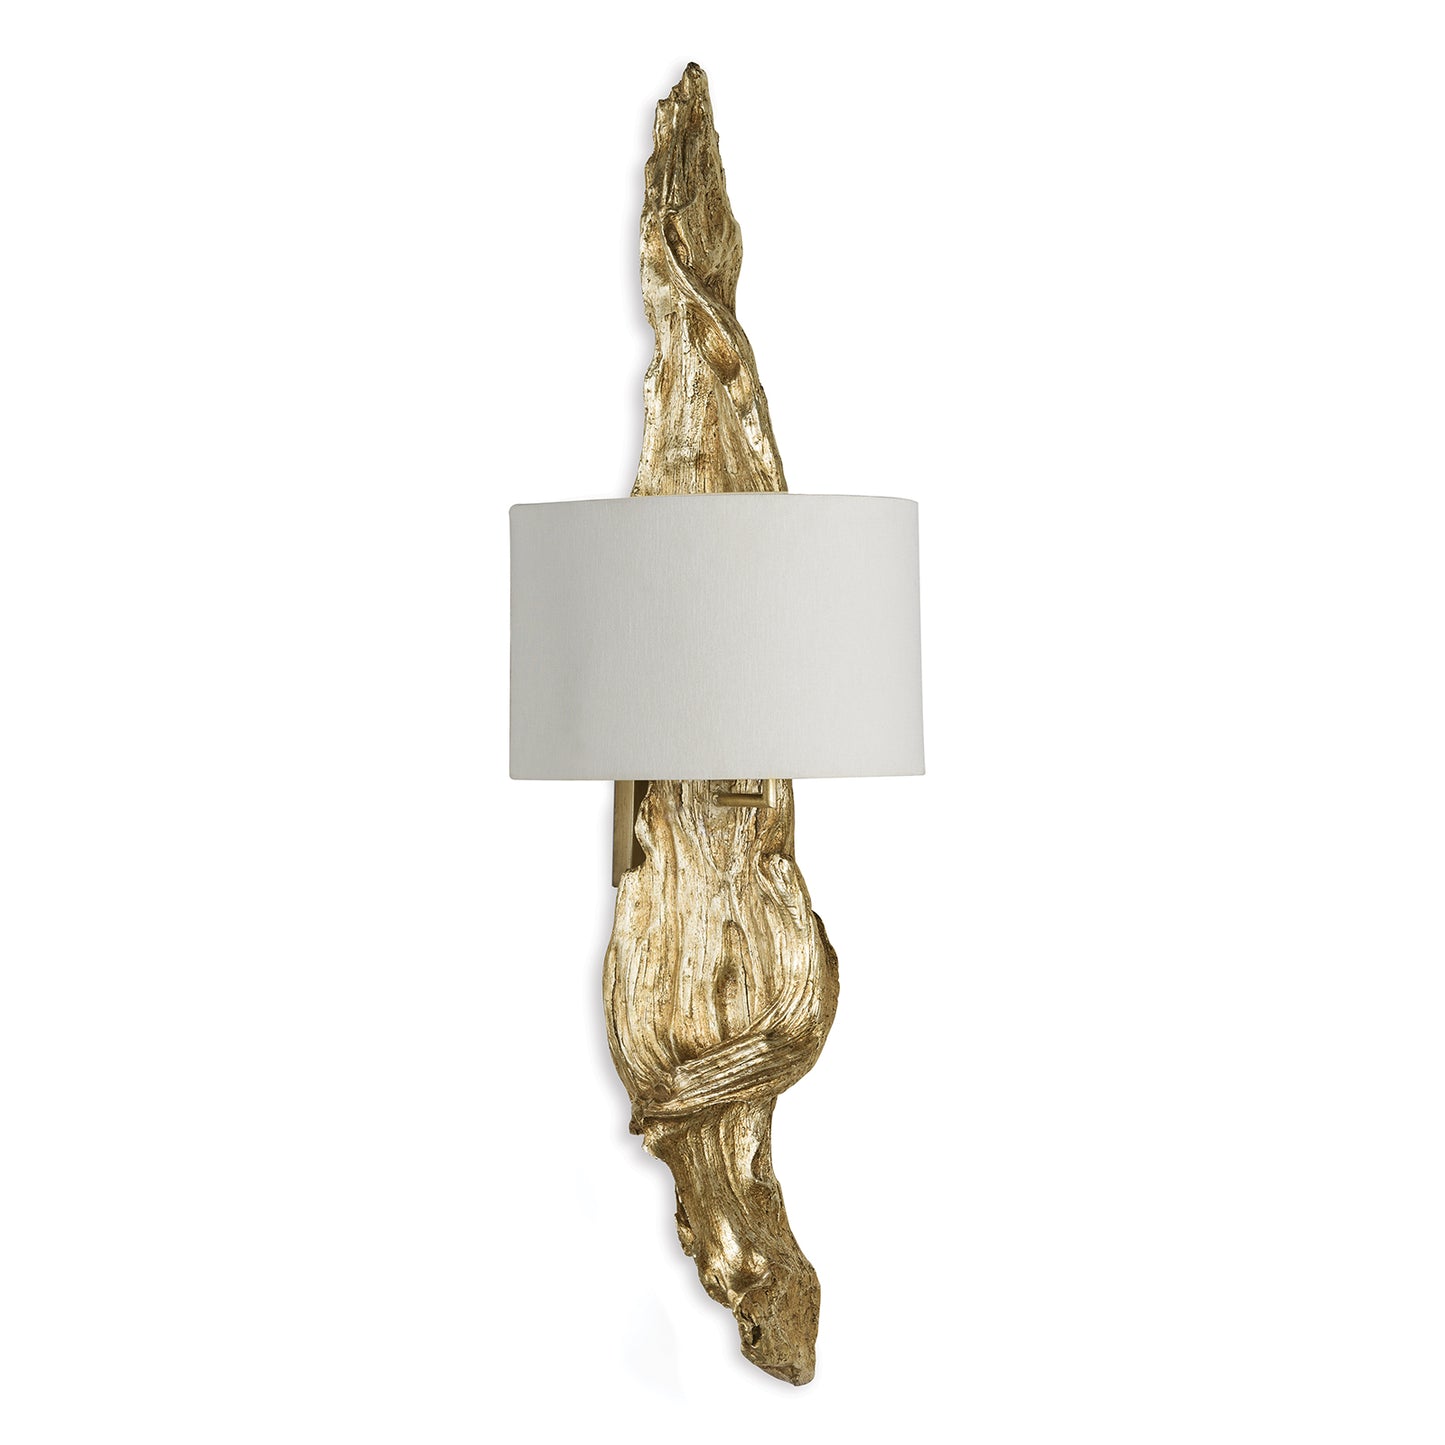 Driftwood Sconce in Antique Gold Leaf by Regina Andrew